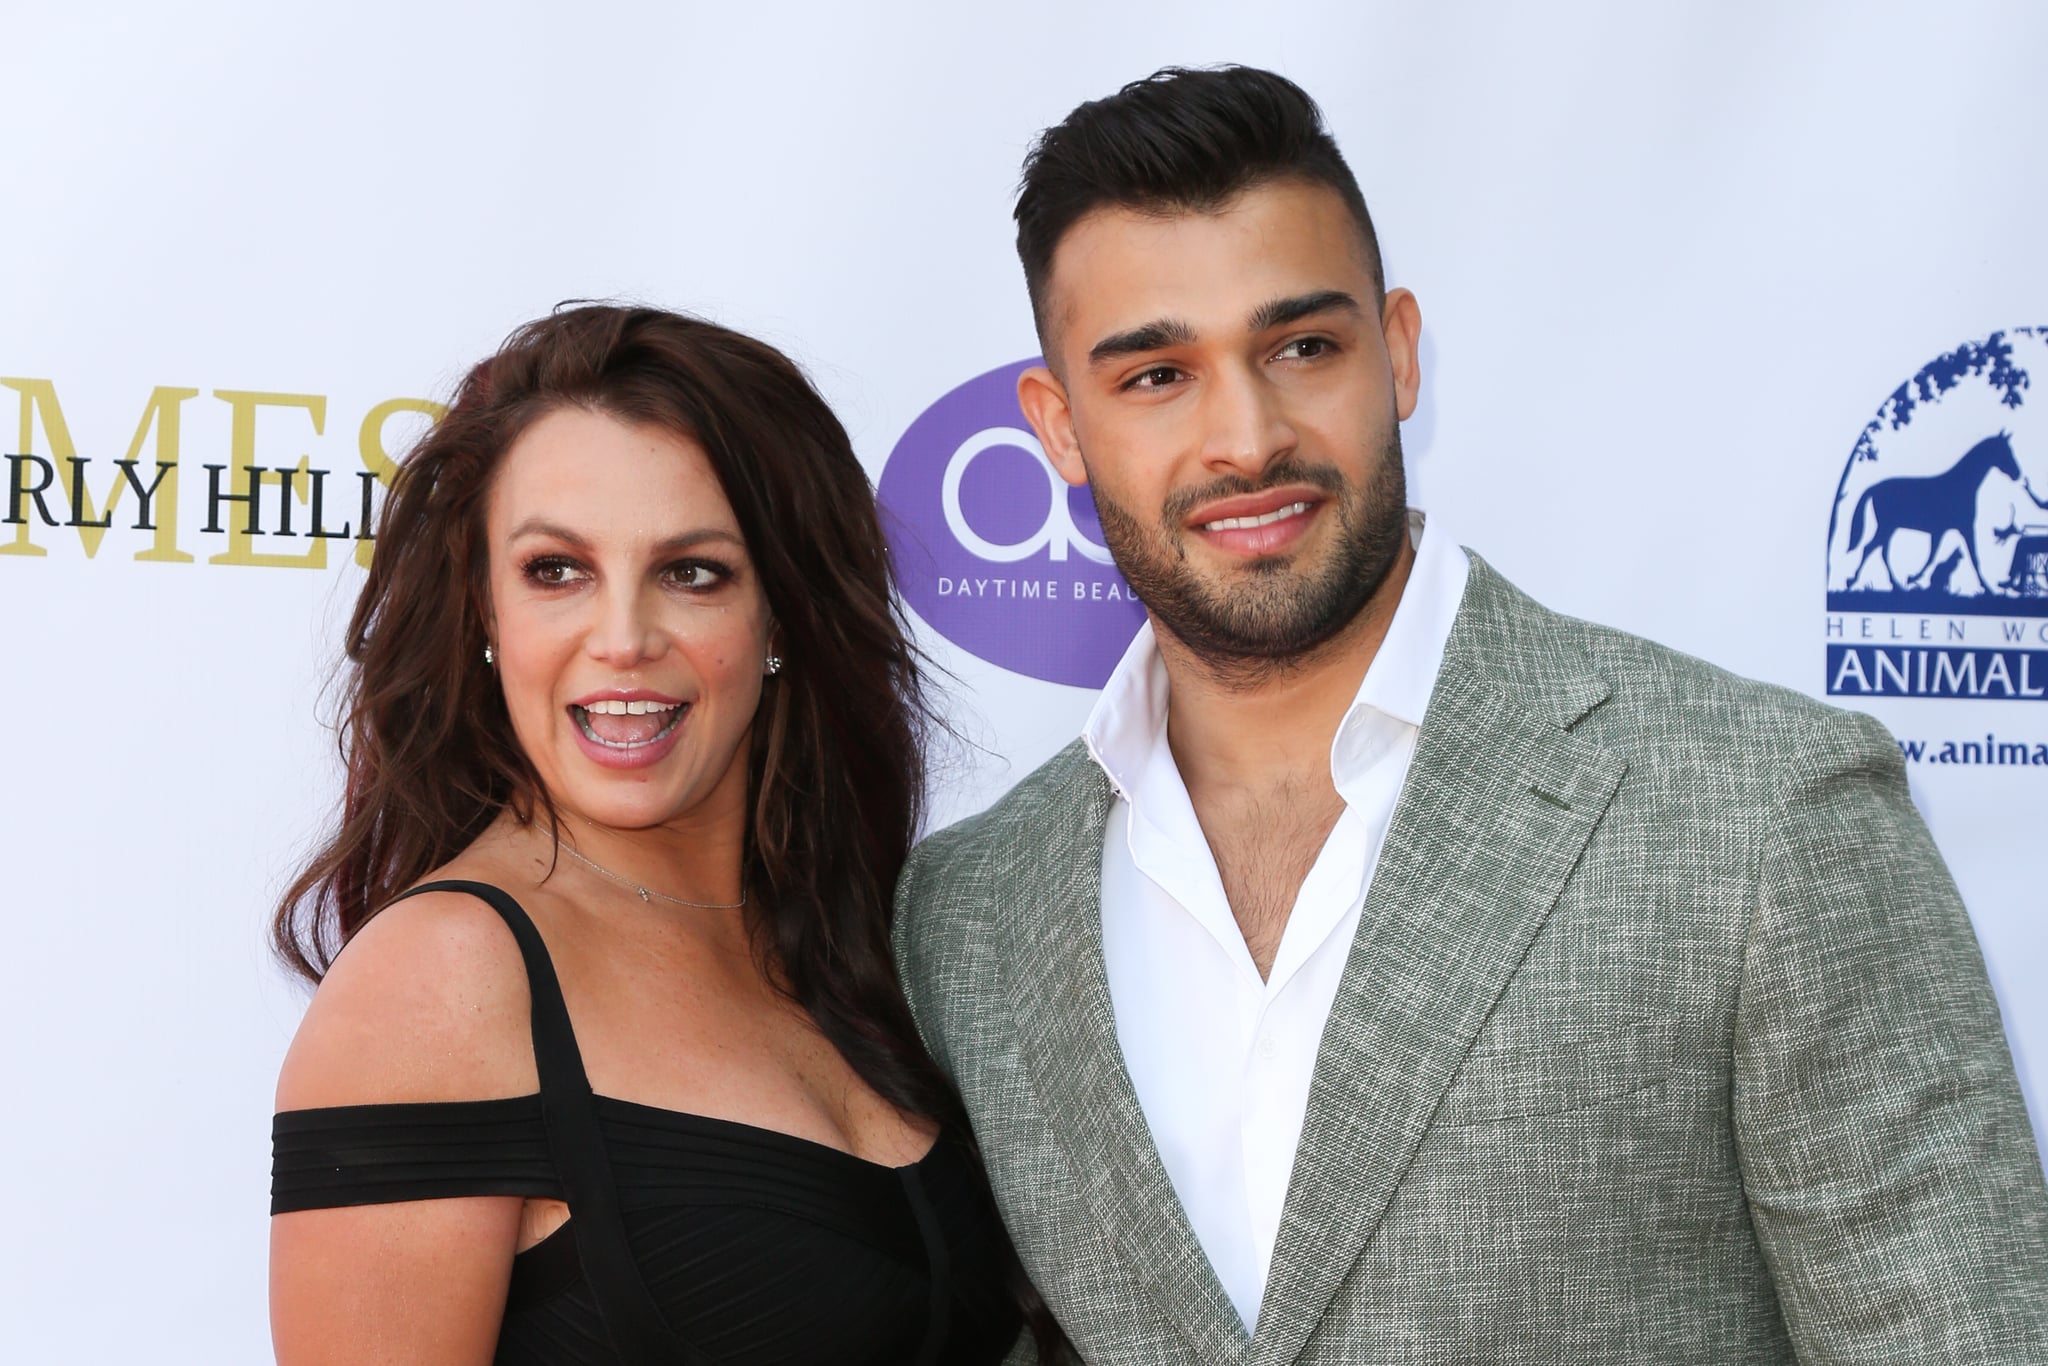 LOS ANGELES, CALIFORNIA - SEPTEMBER 20: Britney Spears (L) and Sam Asghari (R) attend the 2019 Daytime Beauty Awards at The Taglyan Complex on September 20, 2019 in Los Angeles, California. (Photo by Paul Archuleta/FilmMagic )